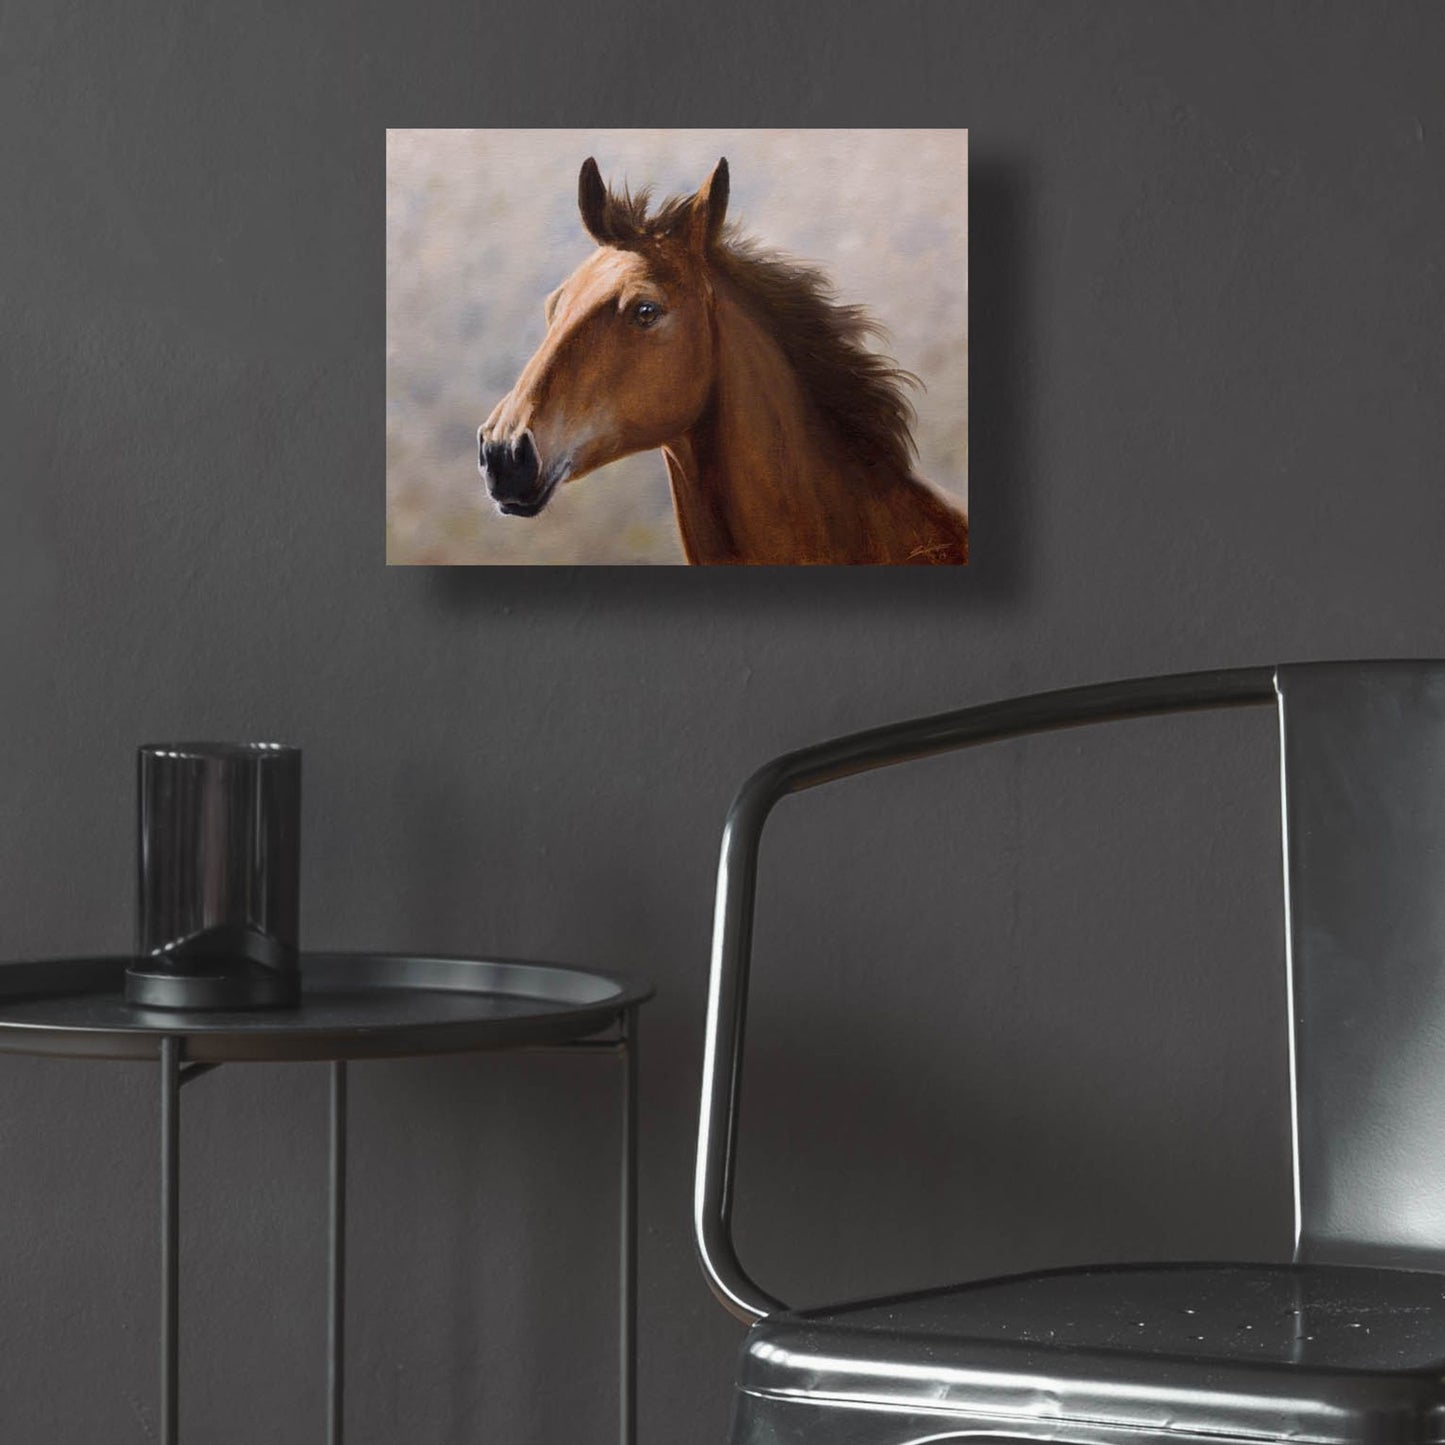 Epic Art 'Horse Thoughts' by John Silver, Acrylic Glass Wall Art,16x12